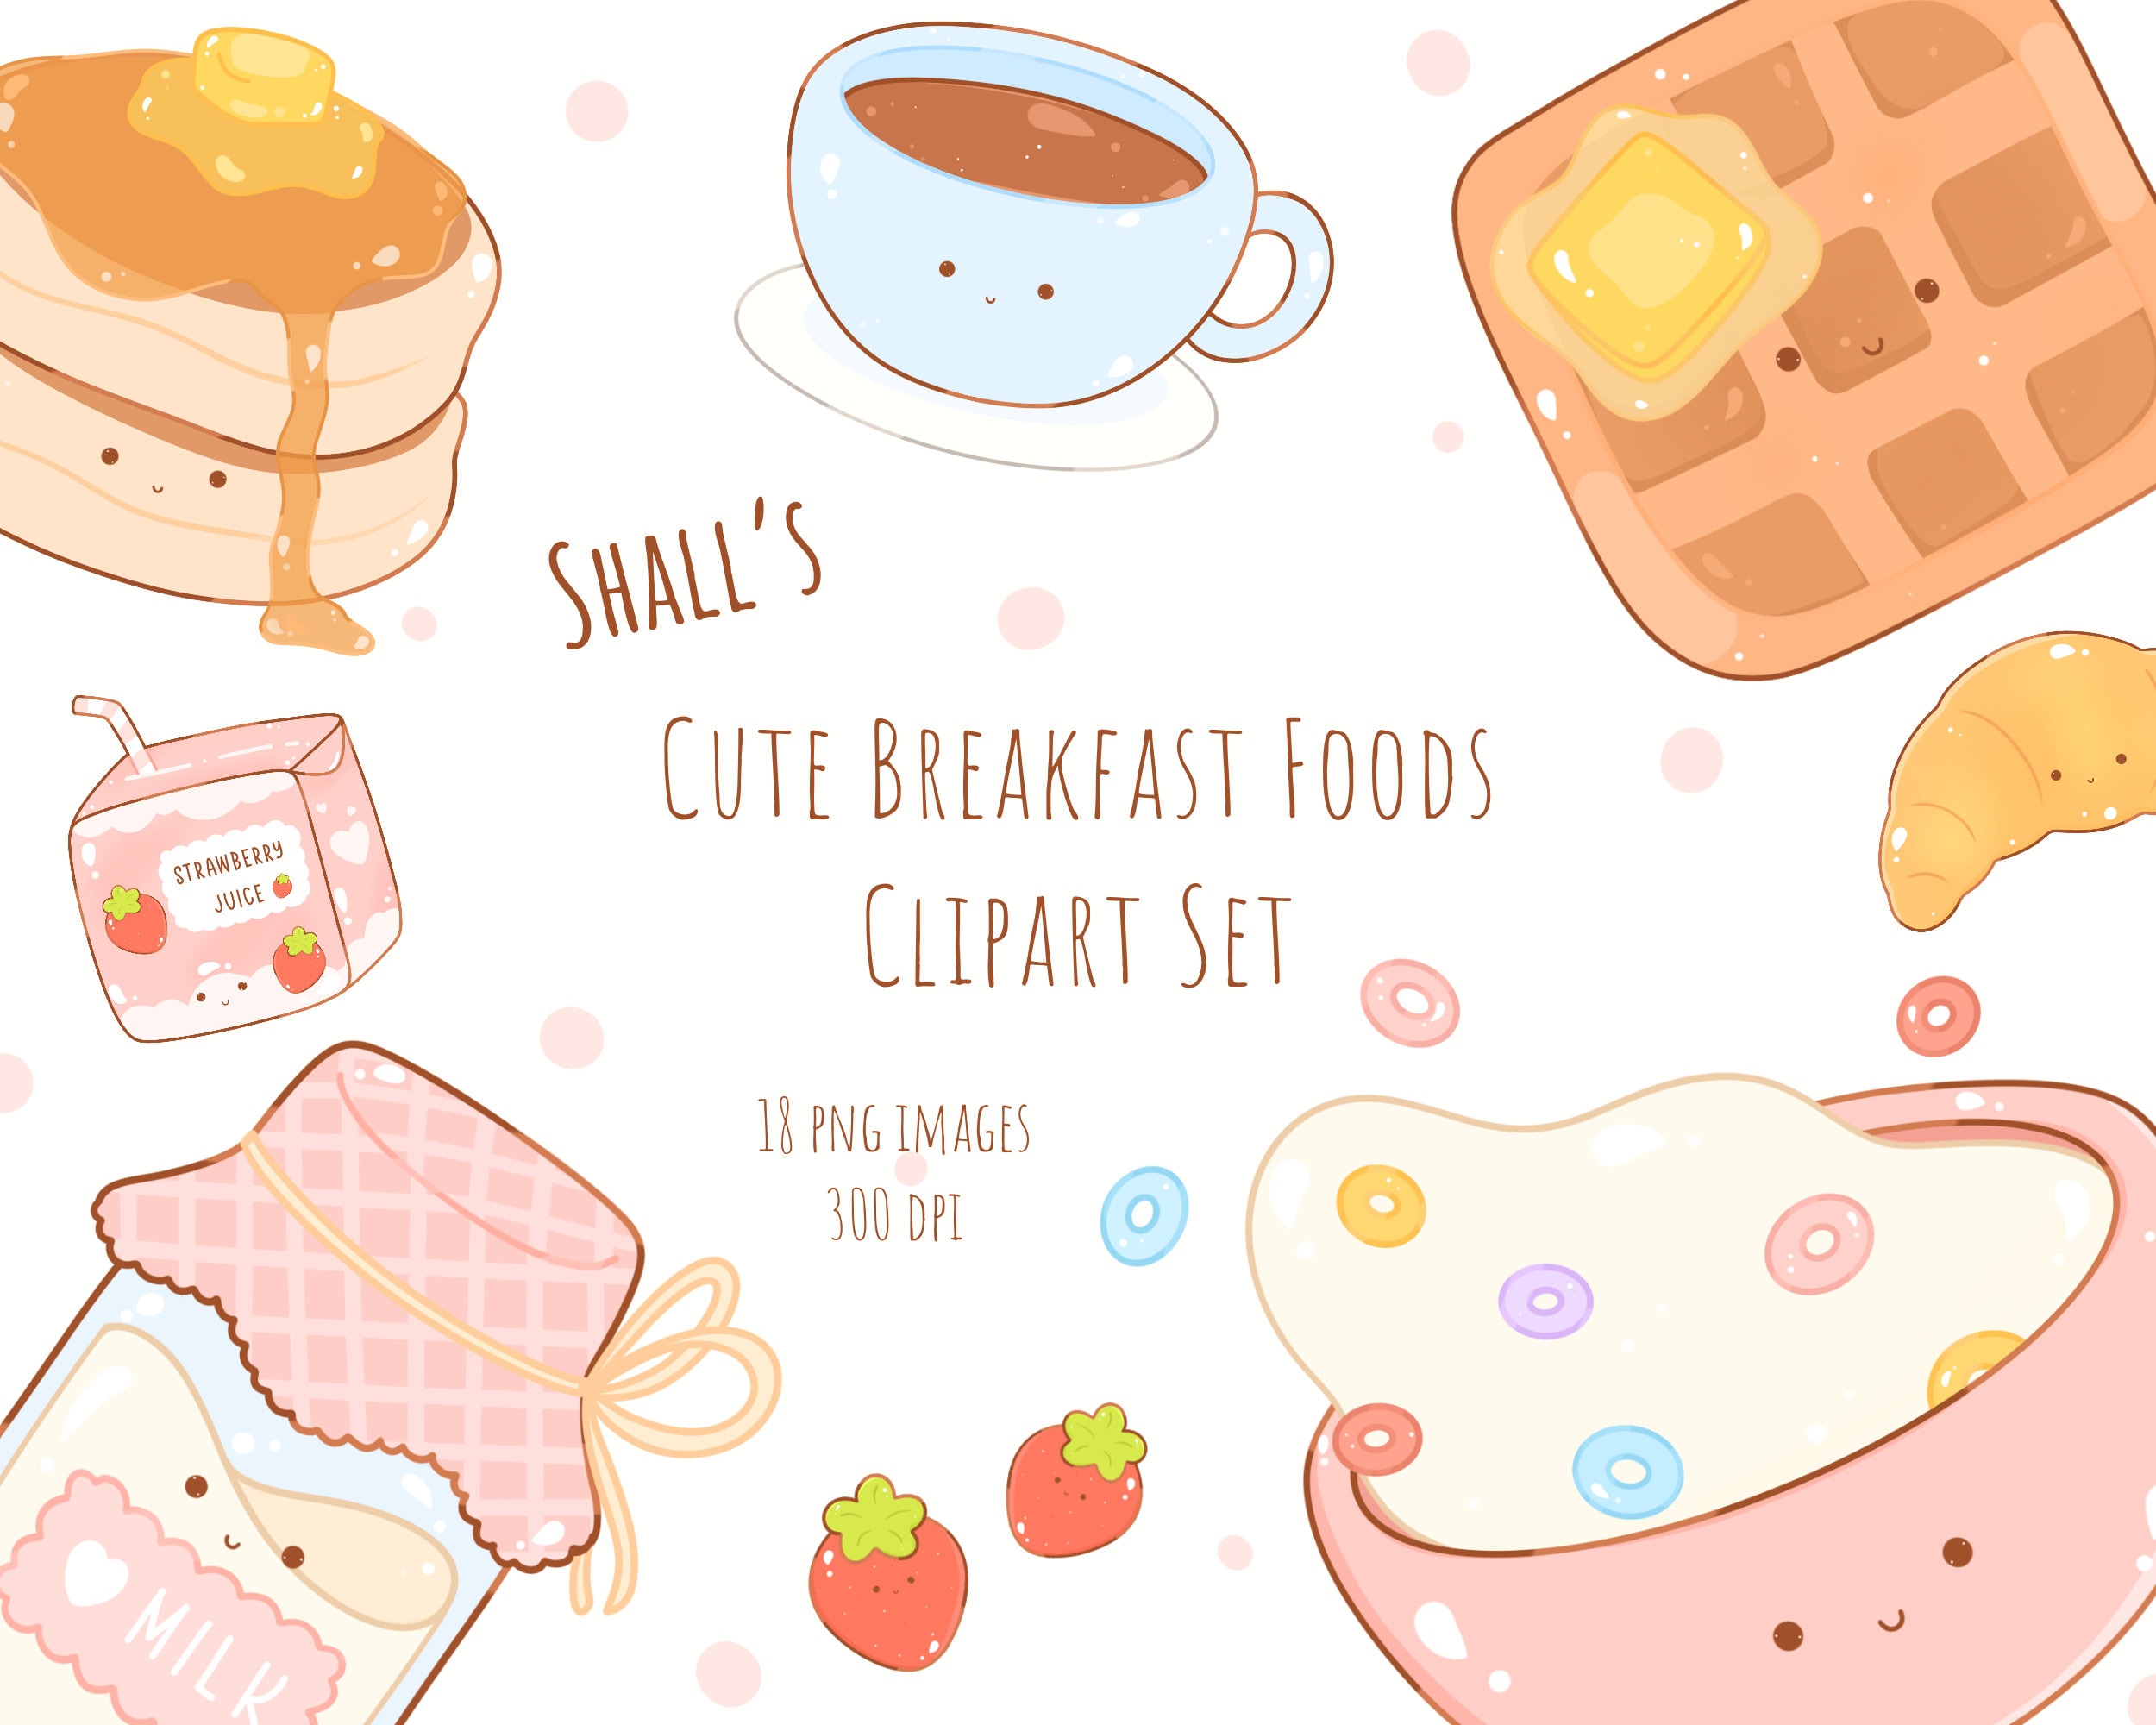 Cute Breakfast Foods Clipart, Breakfast Clipart, Foods Clipart, Food  Illustration, Milk Carton Clipart, Juice Clipart, Commercial Use 